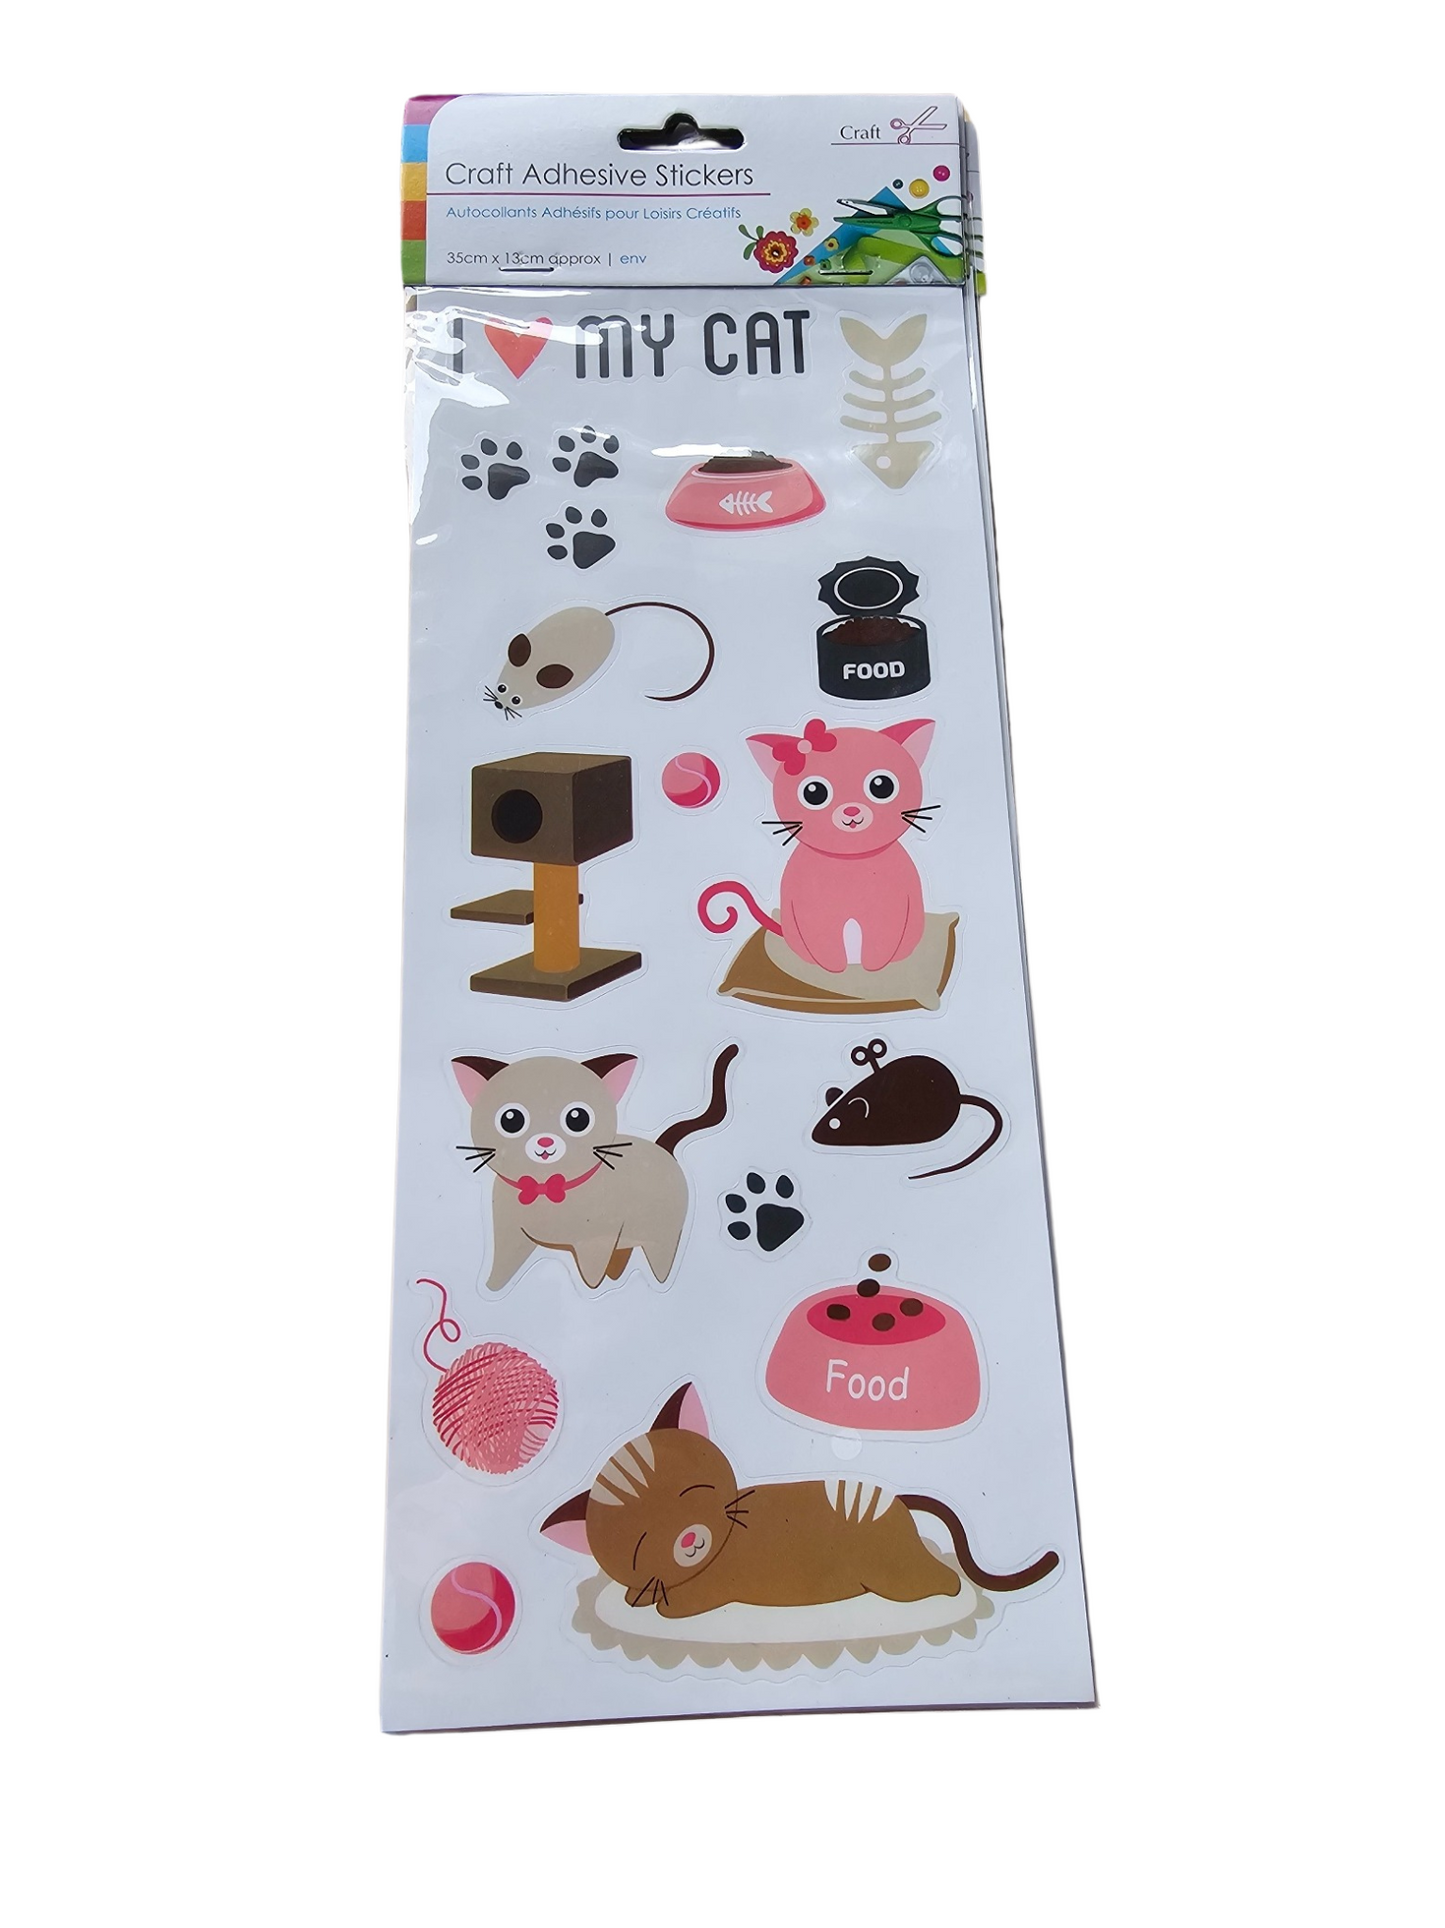 Dog or Cat Craft Adhesive stickers